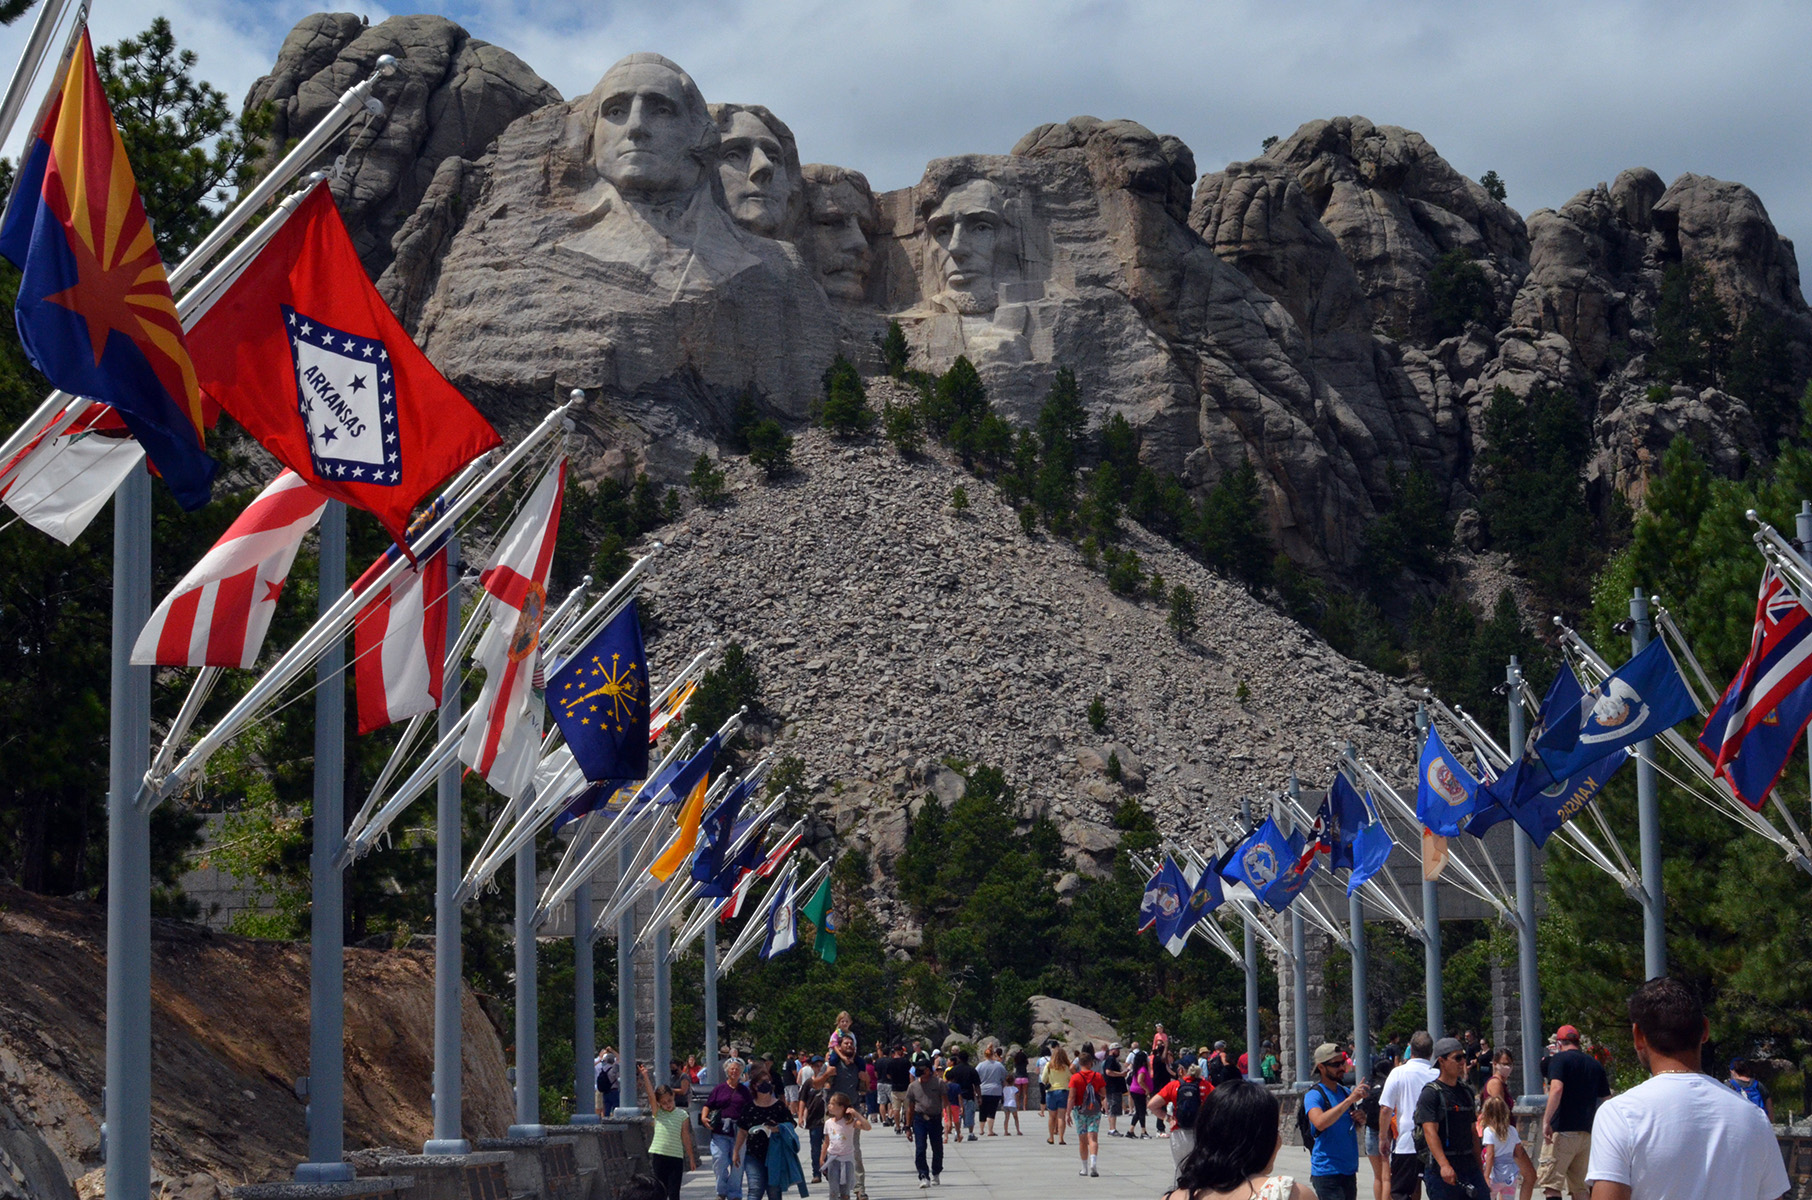 Independence Day 2022 Celebrations at Mount Rushmore Mount Rushmore